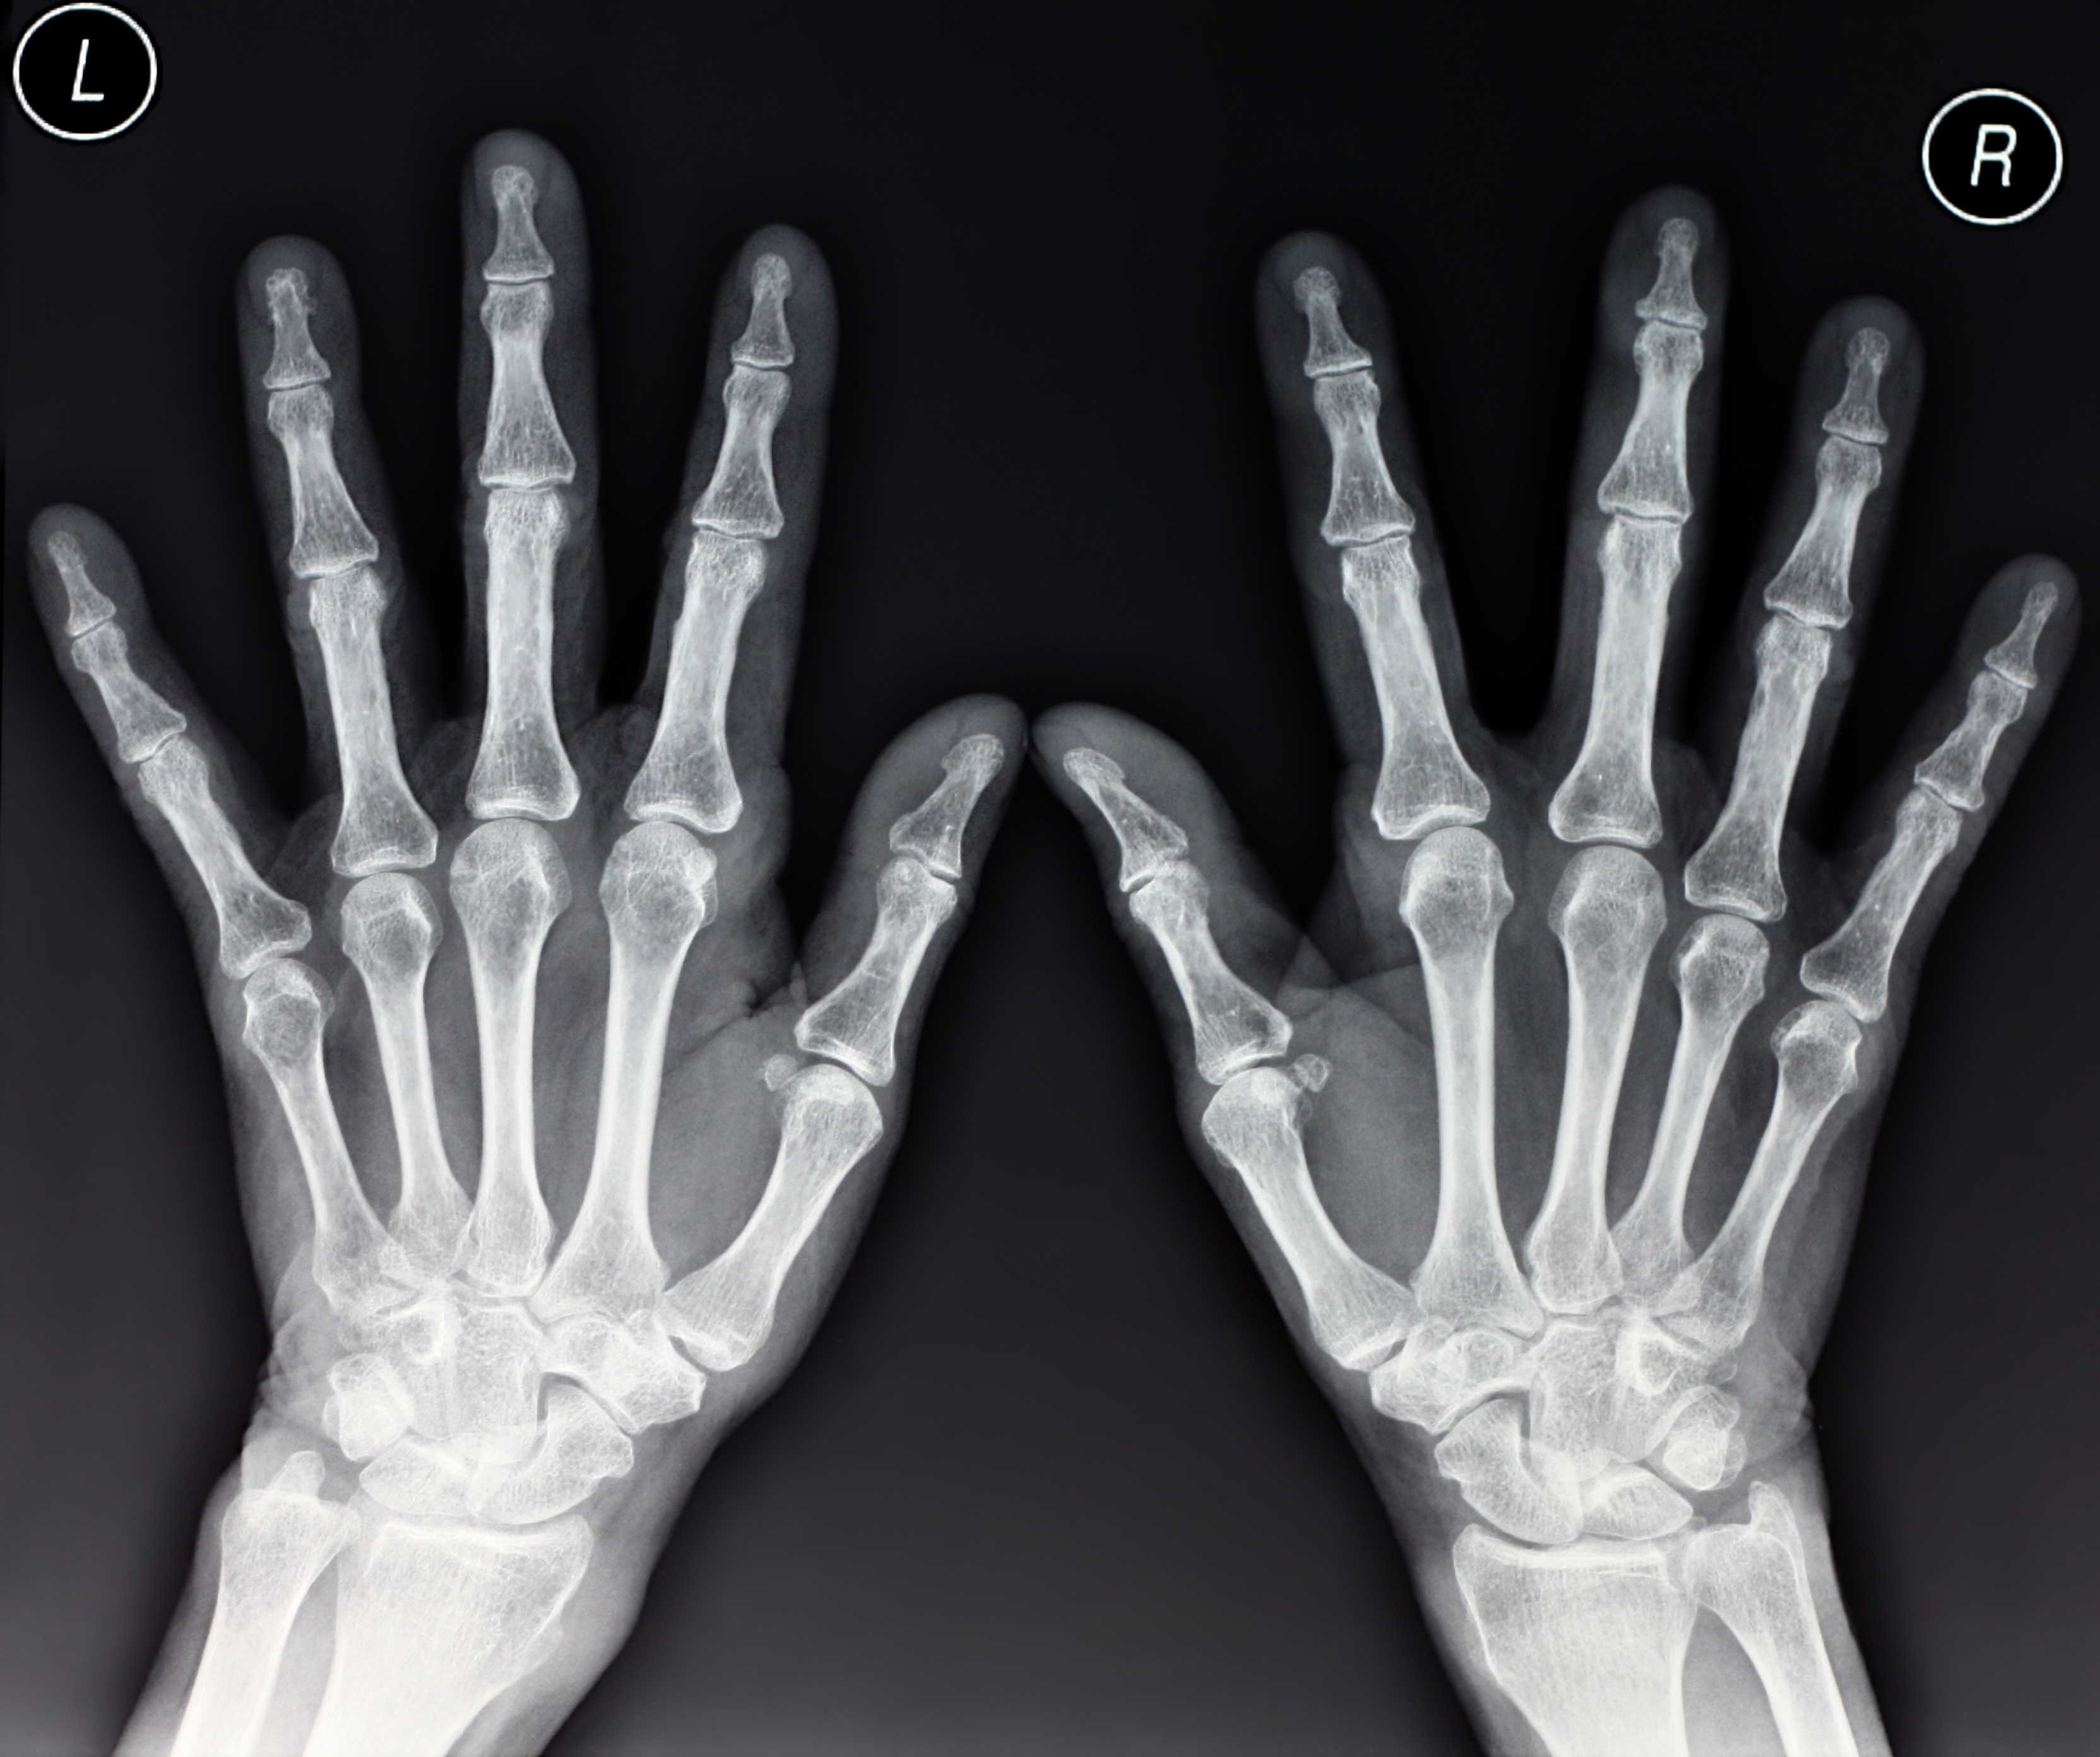 Hands X-ray